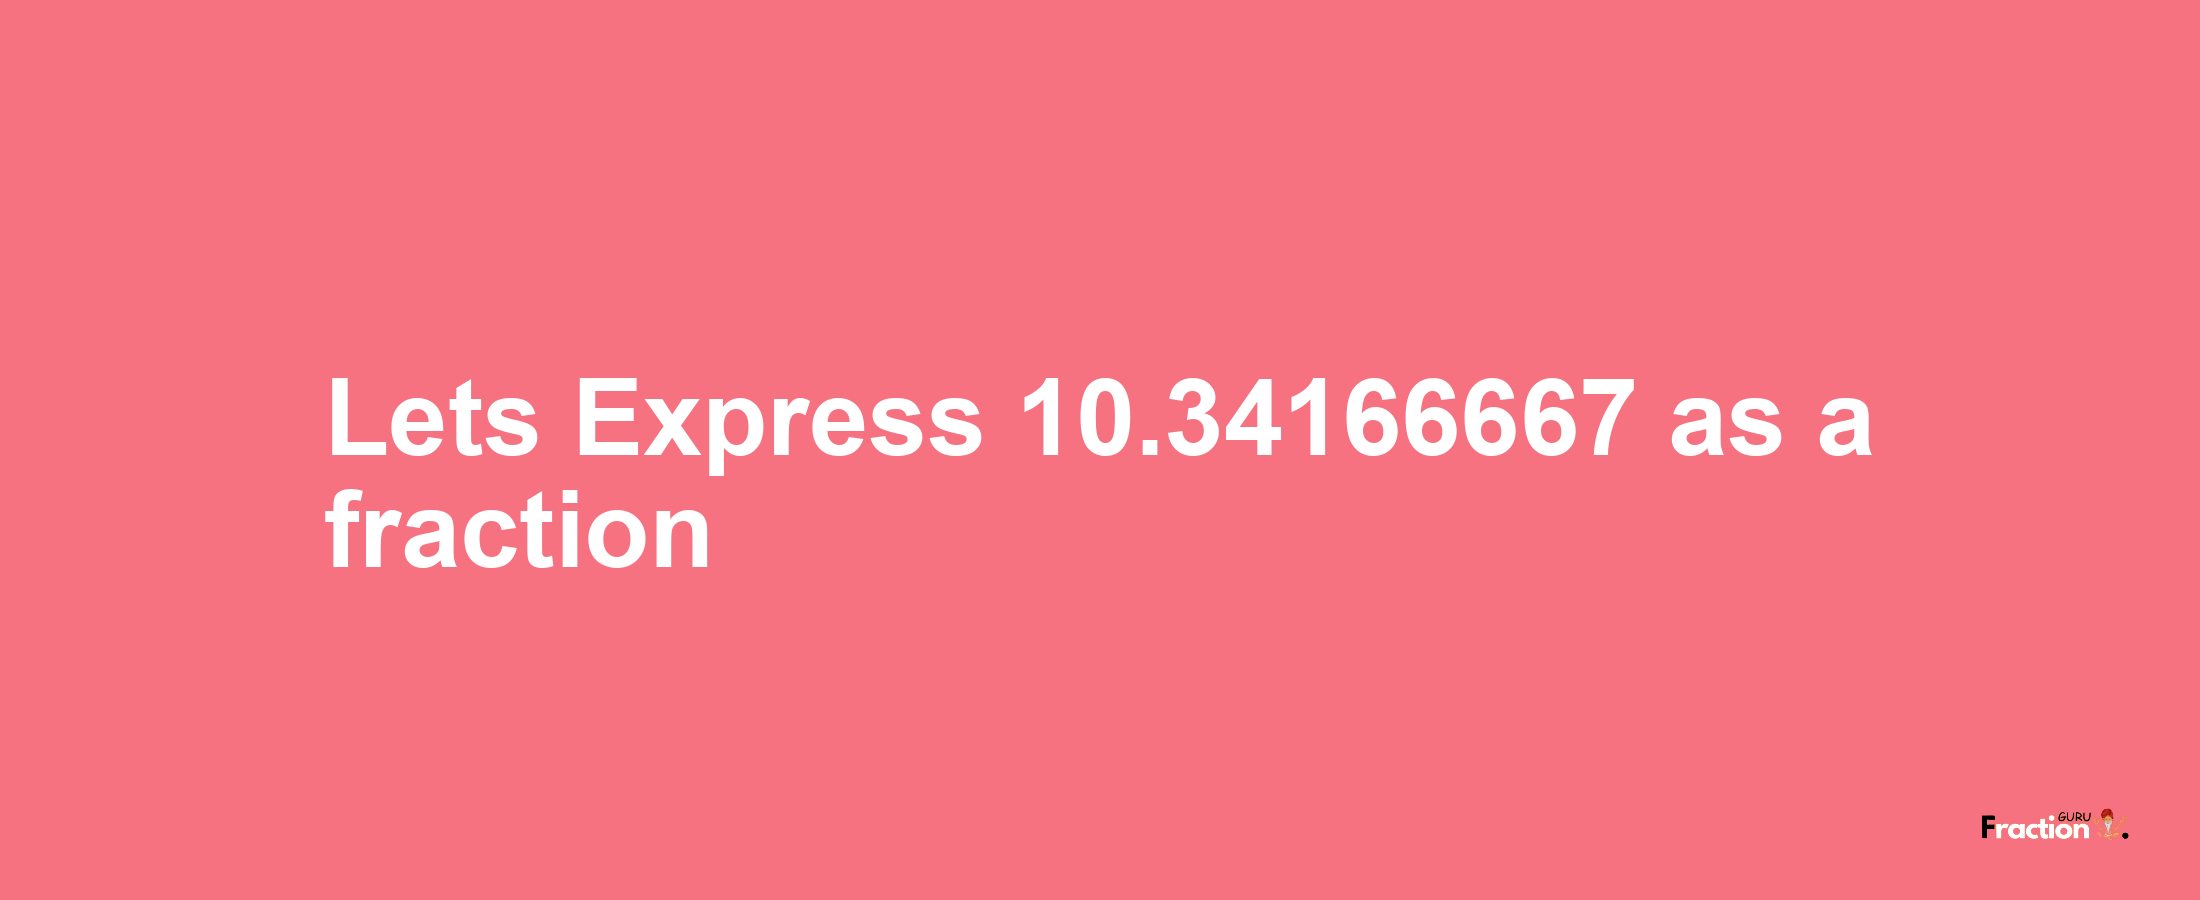 Lets Express 10.34166667 as afraction